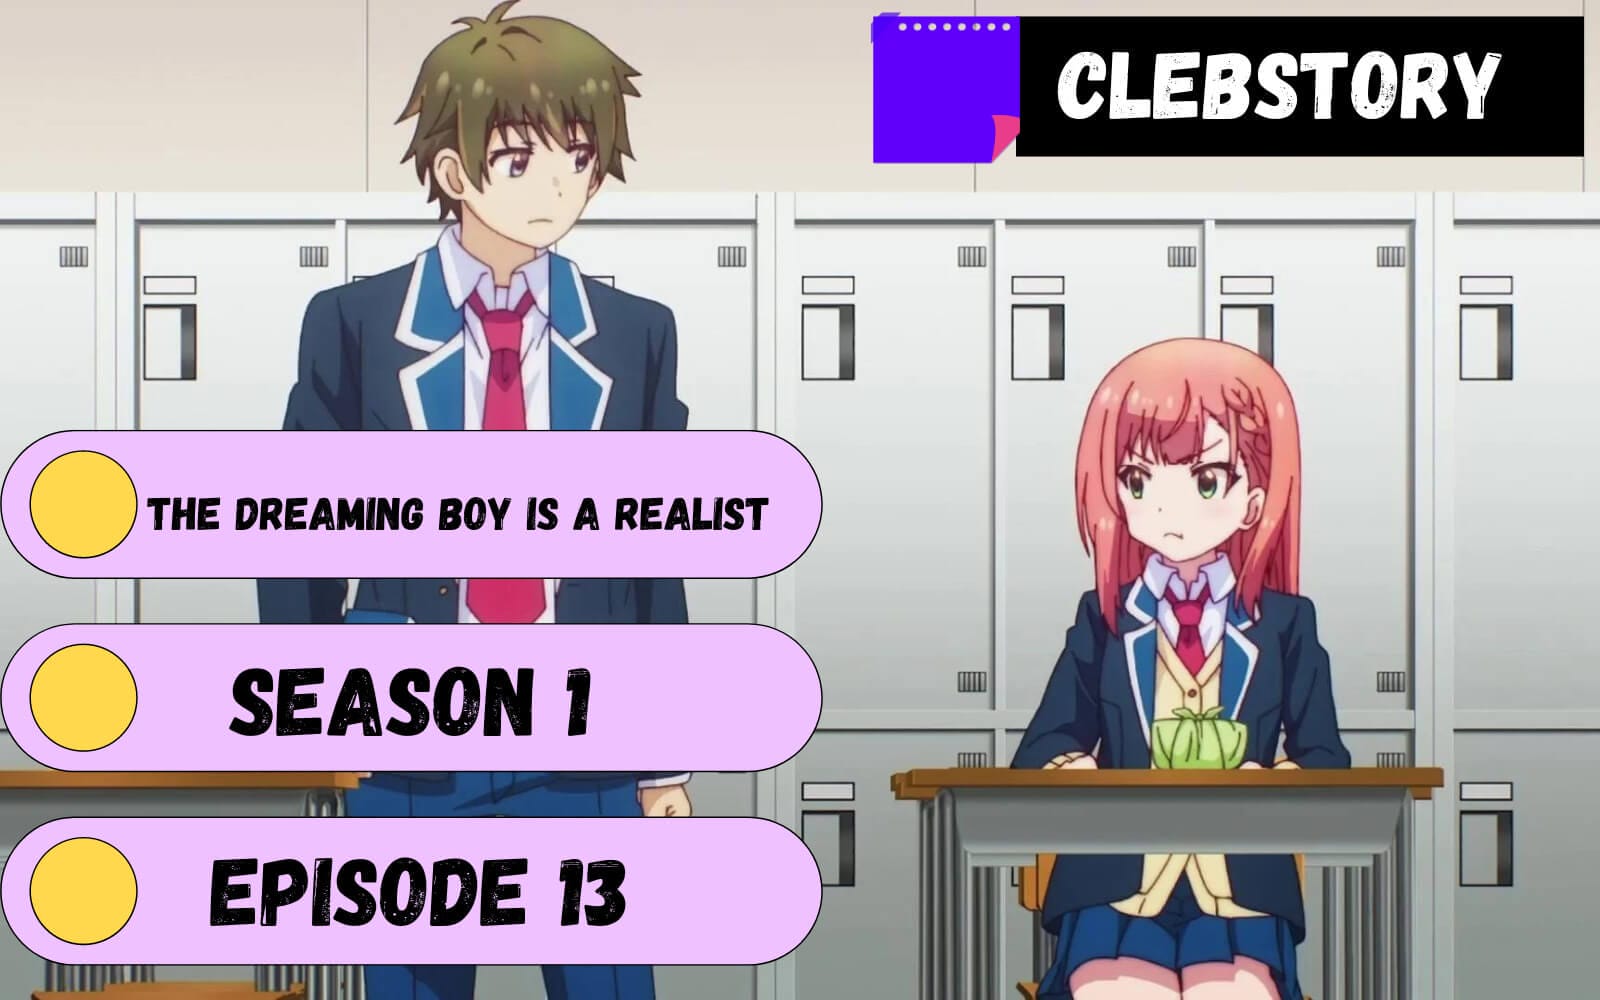 Is There Any Trailer For The Dreaming Boy is a Realist Episode 13